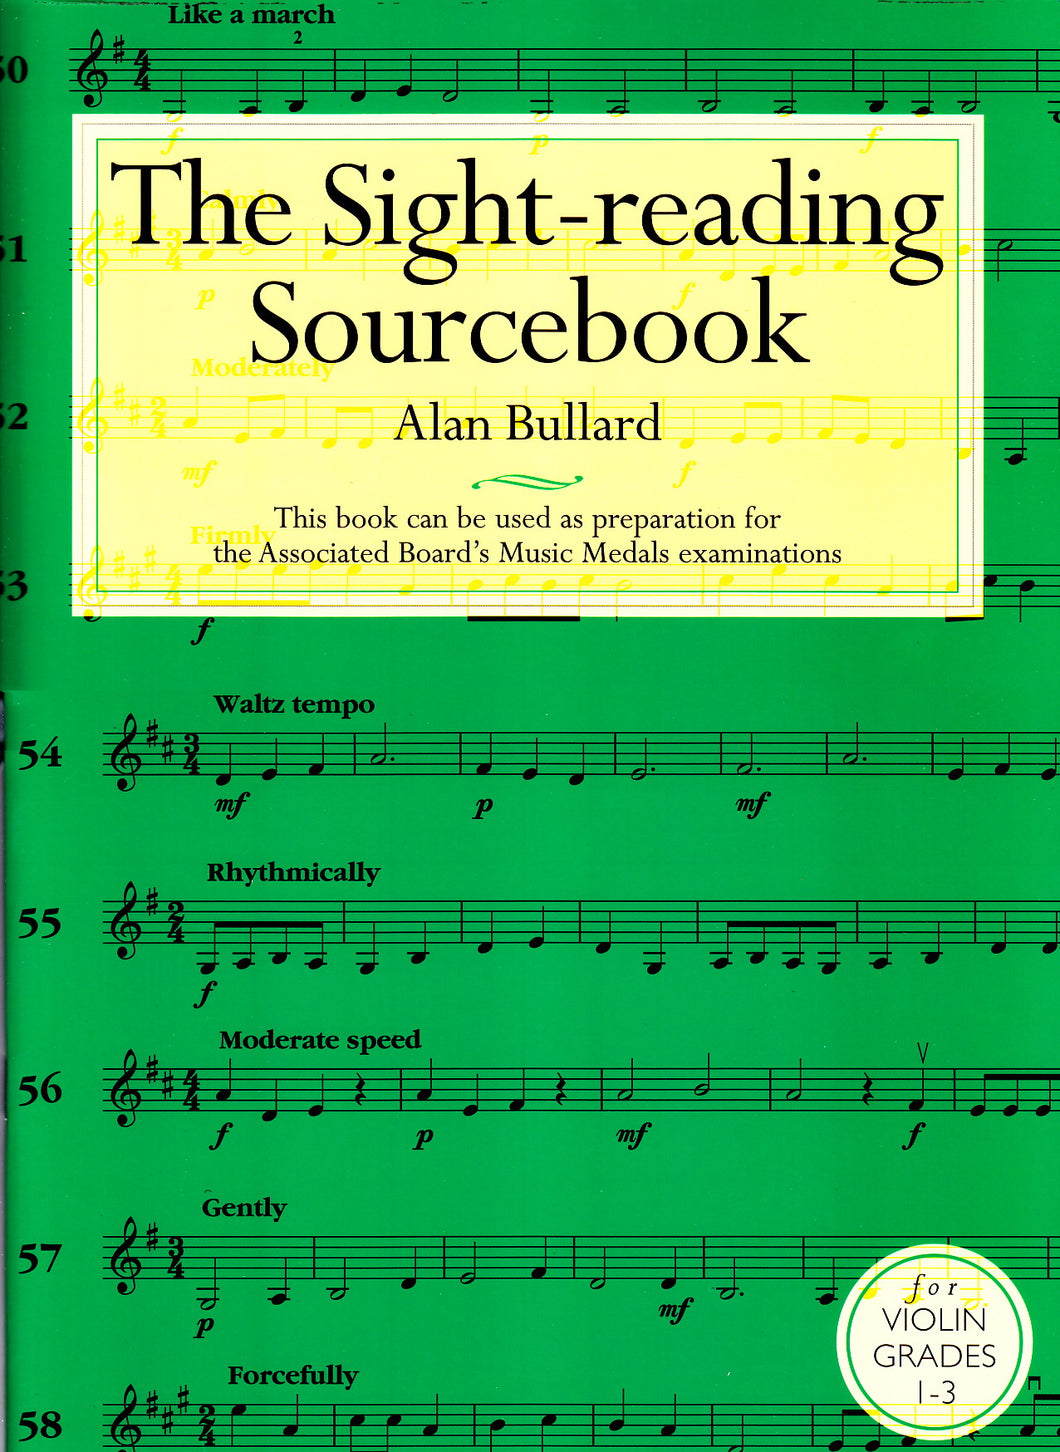 THE SIGHT-READING SOURCE BOOK